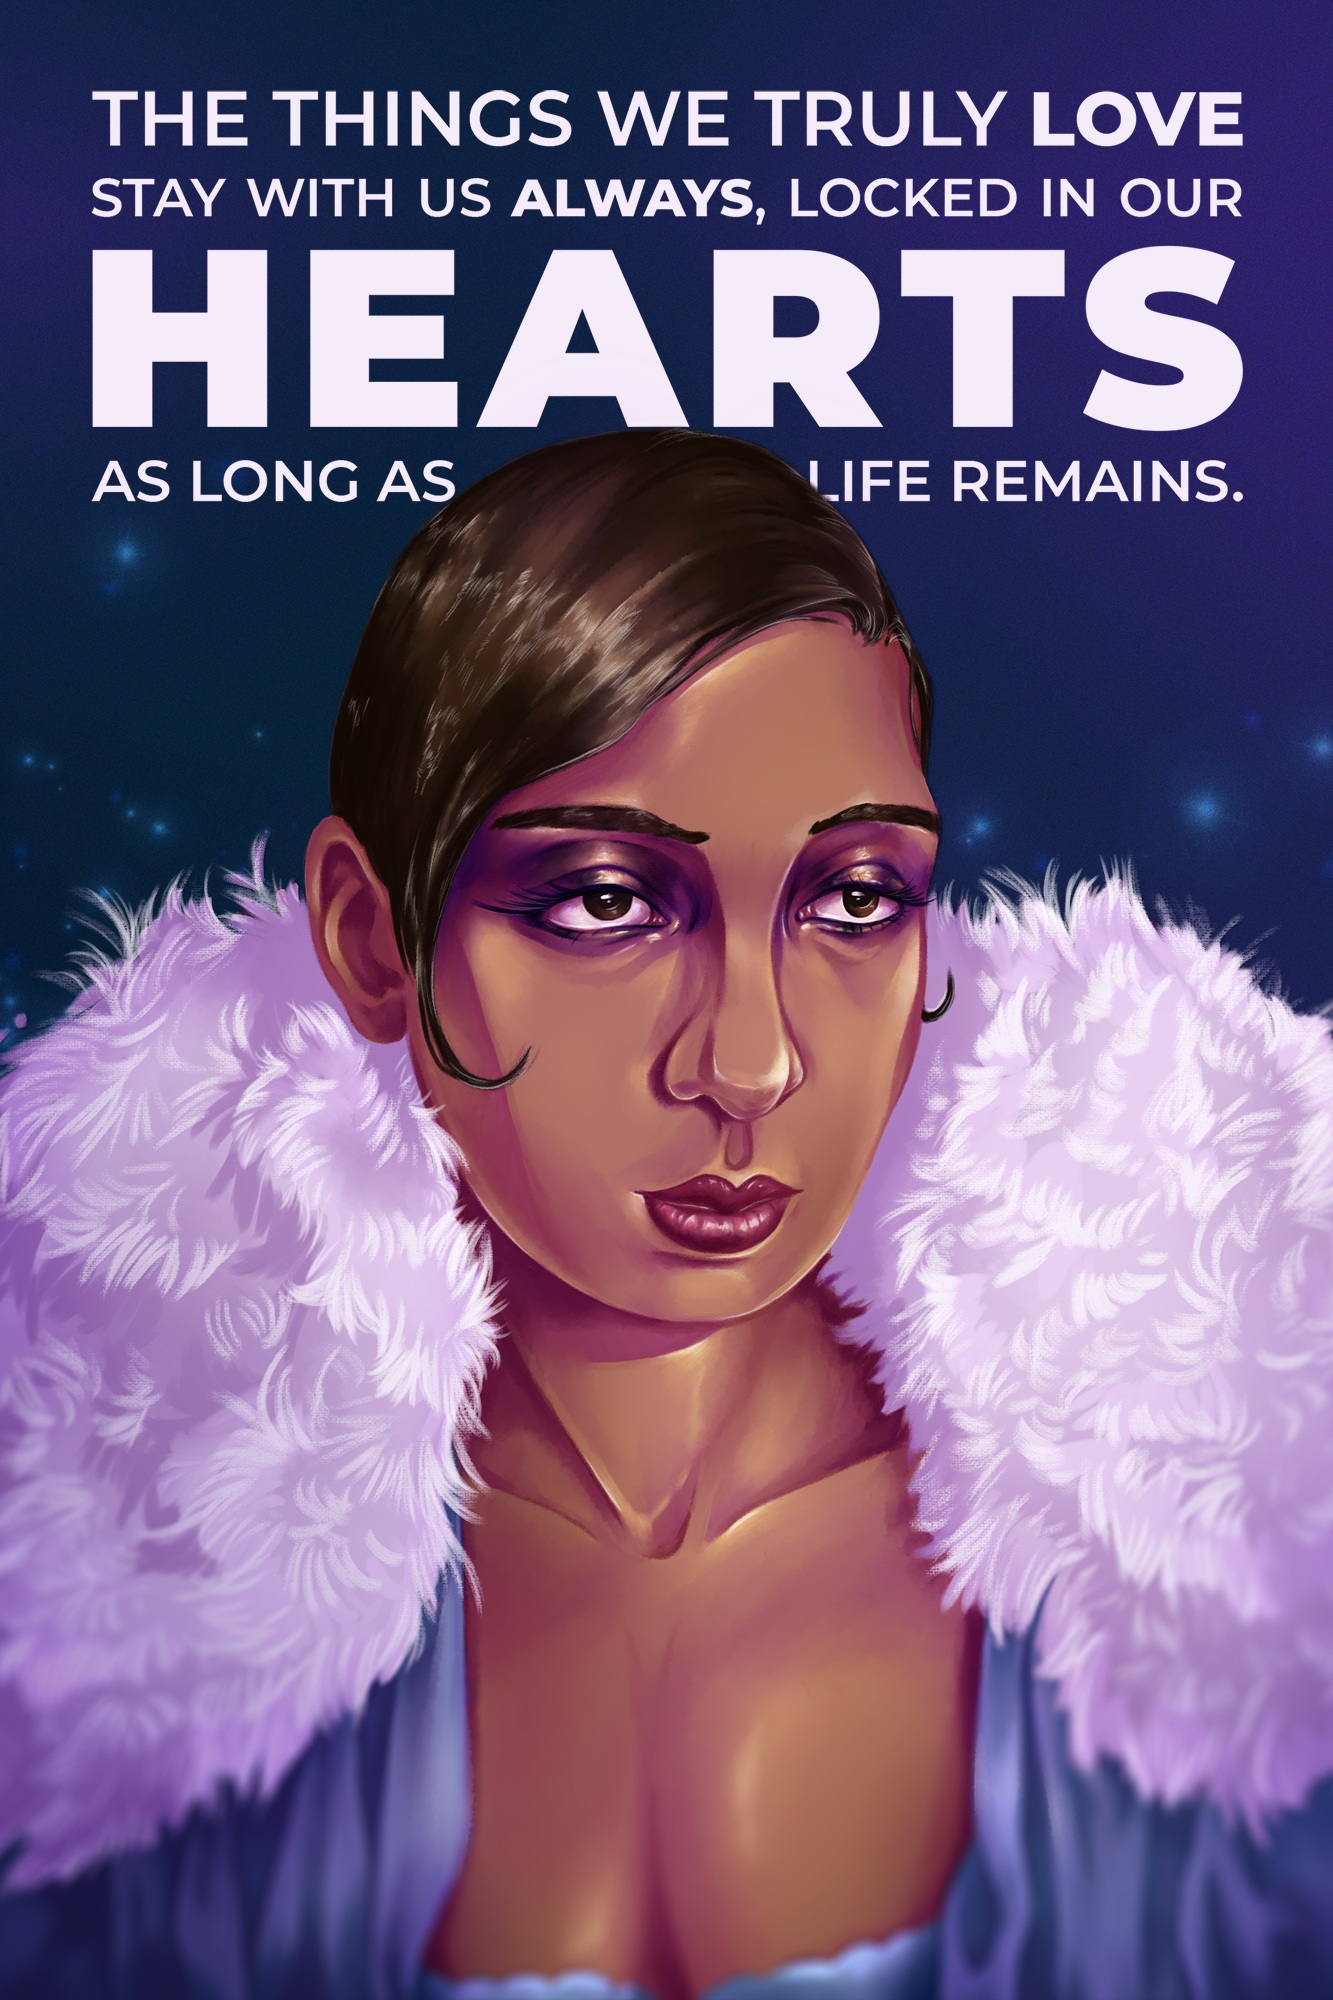 An original illustration of Josephine Baker by Sarah Black, now featuring the quote in bright white letters, "The things we truly love stay with us always, locked in our hearts as long as life remains."